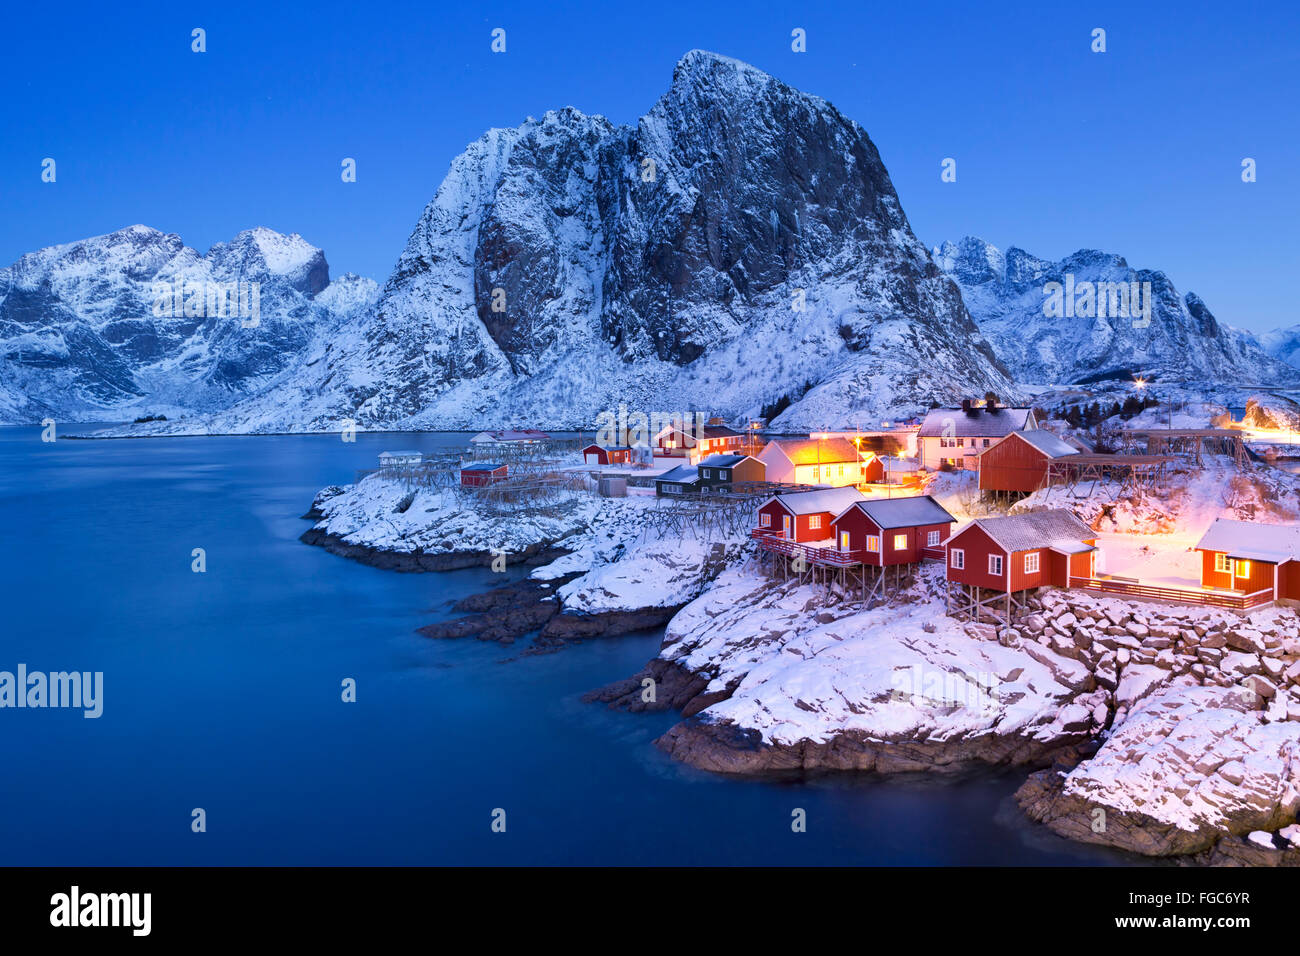 Traditional Norwegian fisherman's cabins, rorbuer, on the island of Hamnøy, Reine on the Lofoten in northern Norway. Photographe Stock Photo